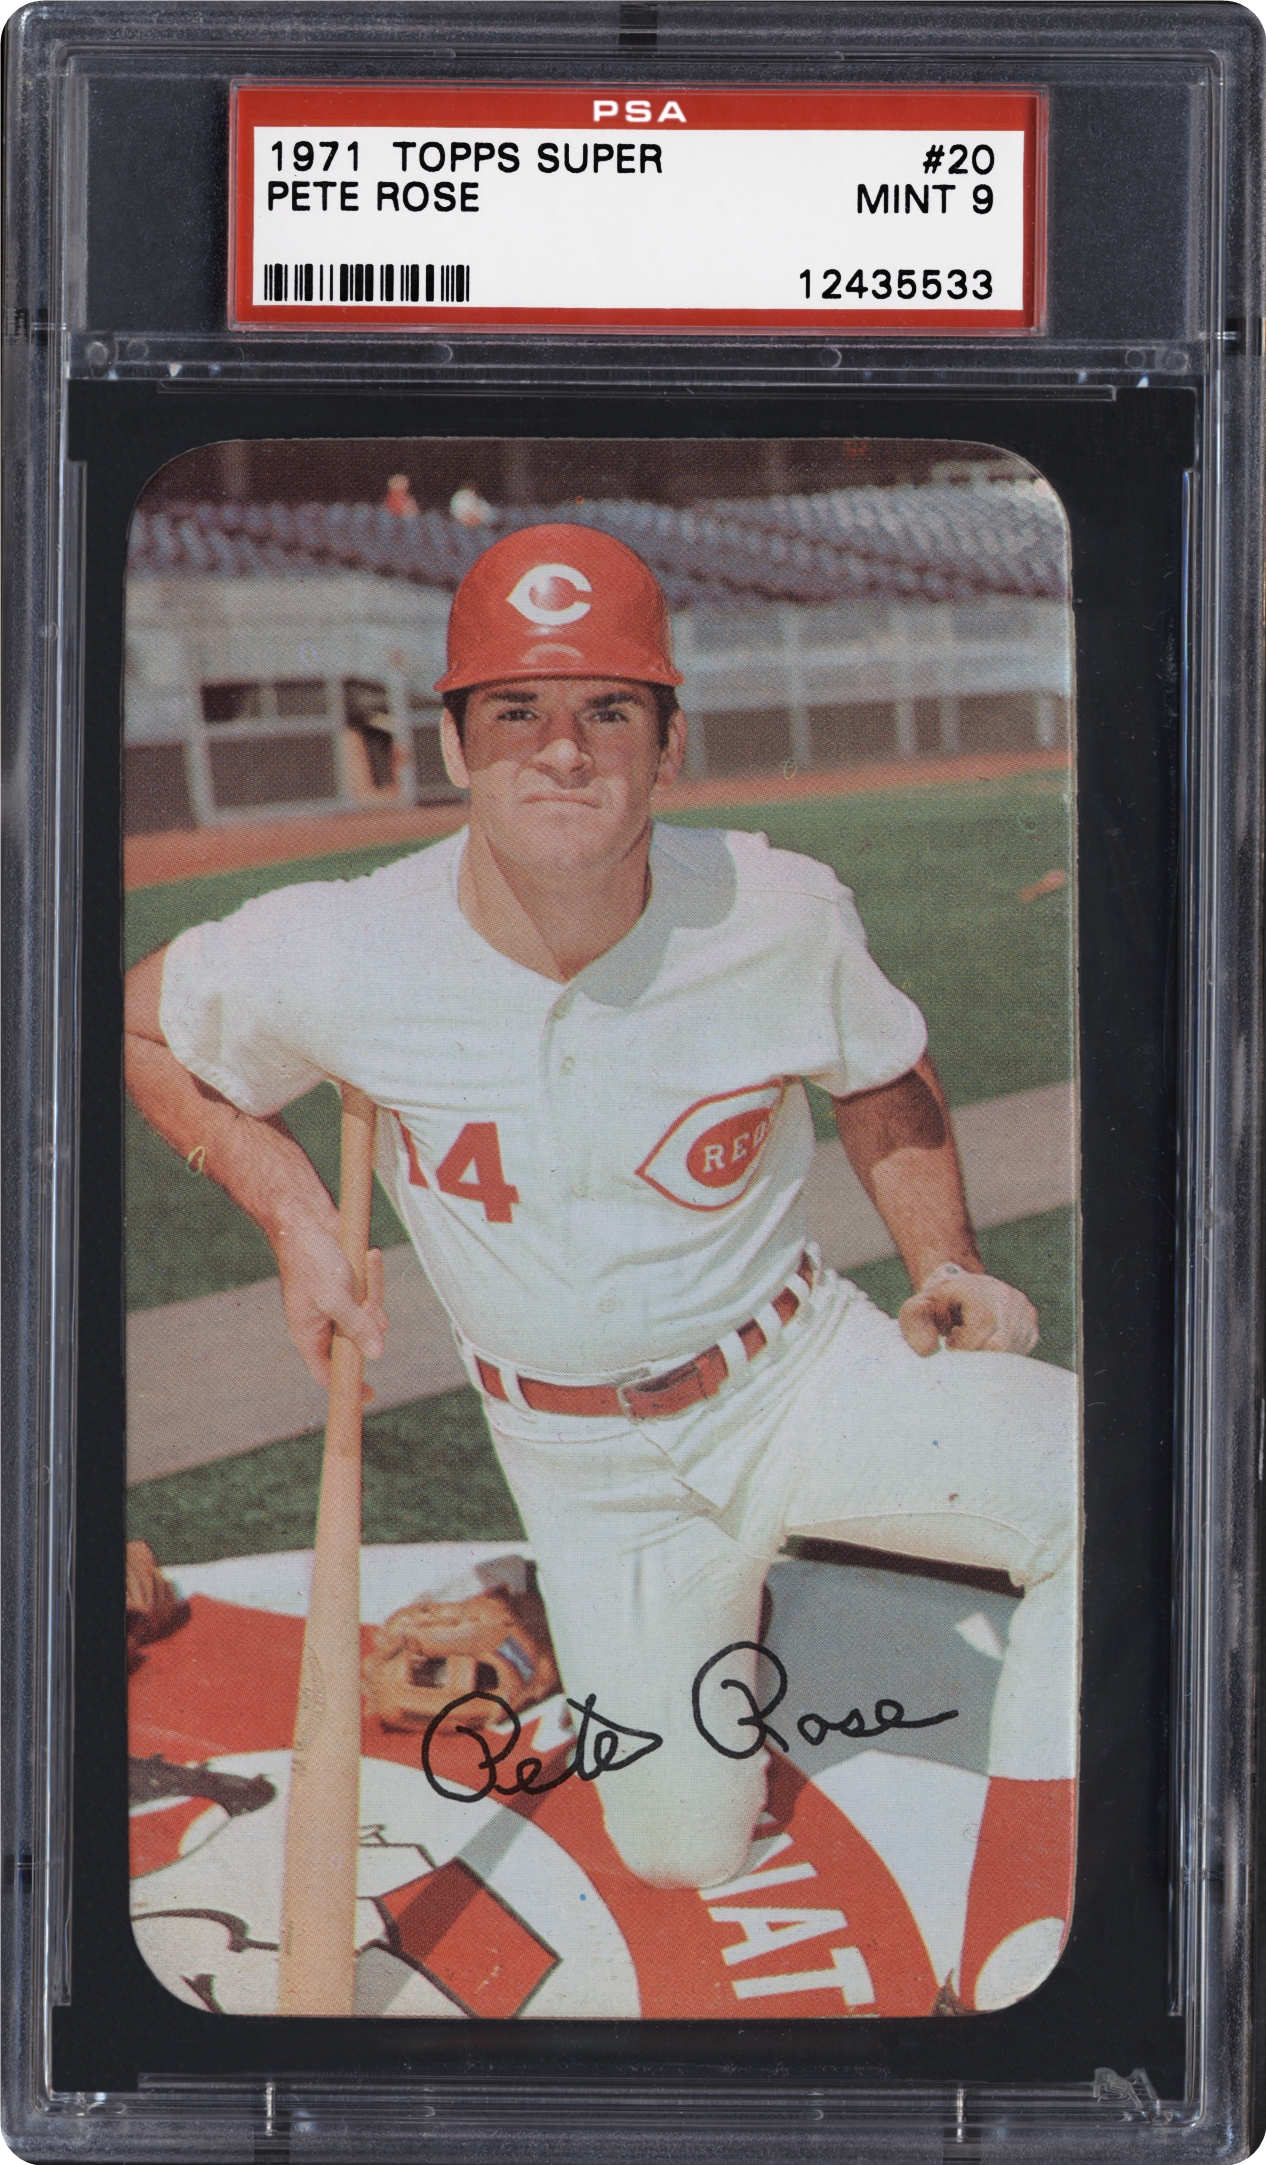 1971 Topps Super Pete Rose PSA CardFacts™